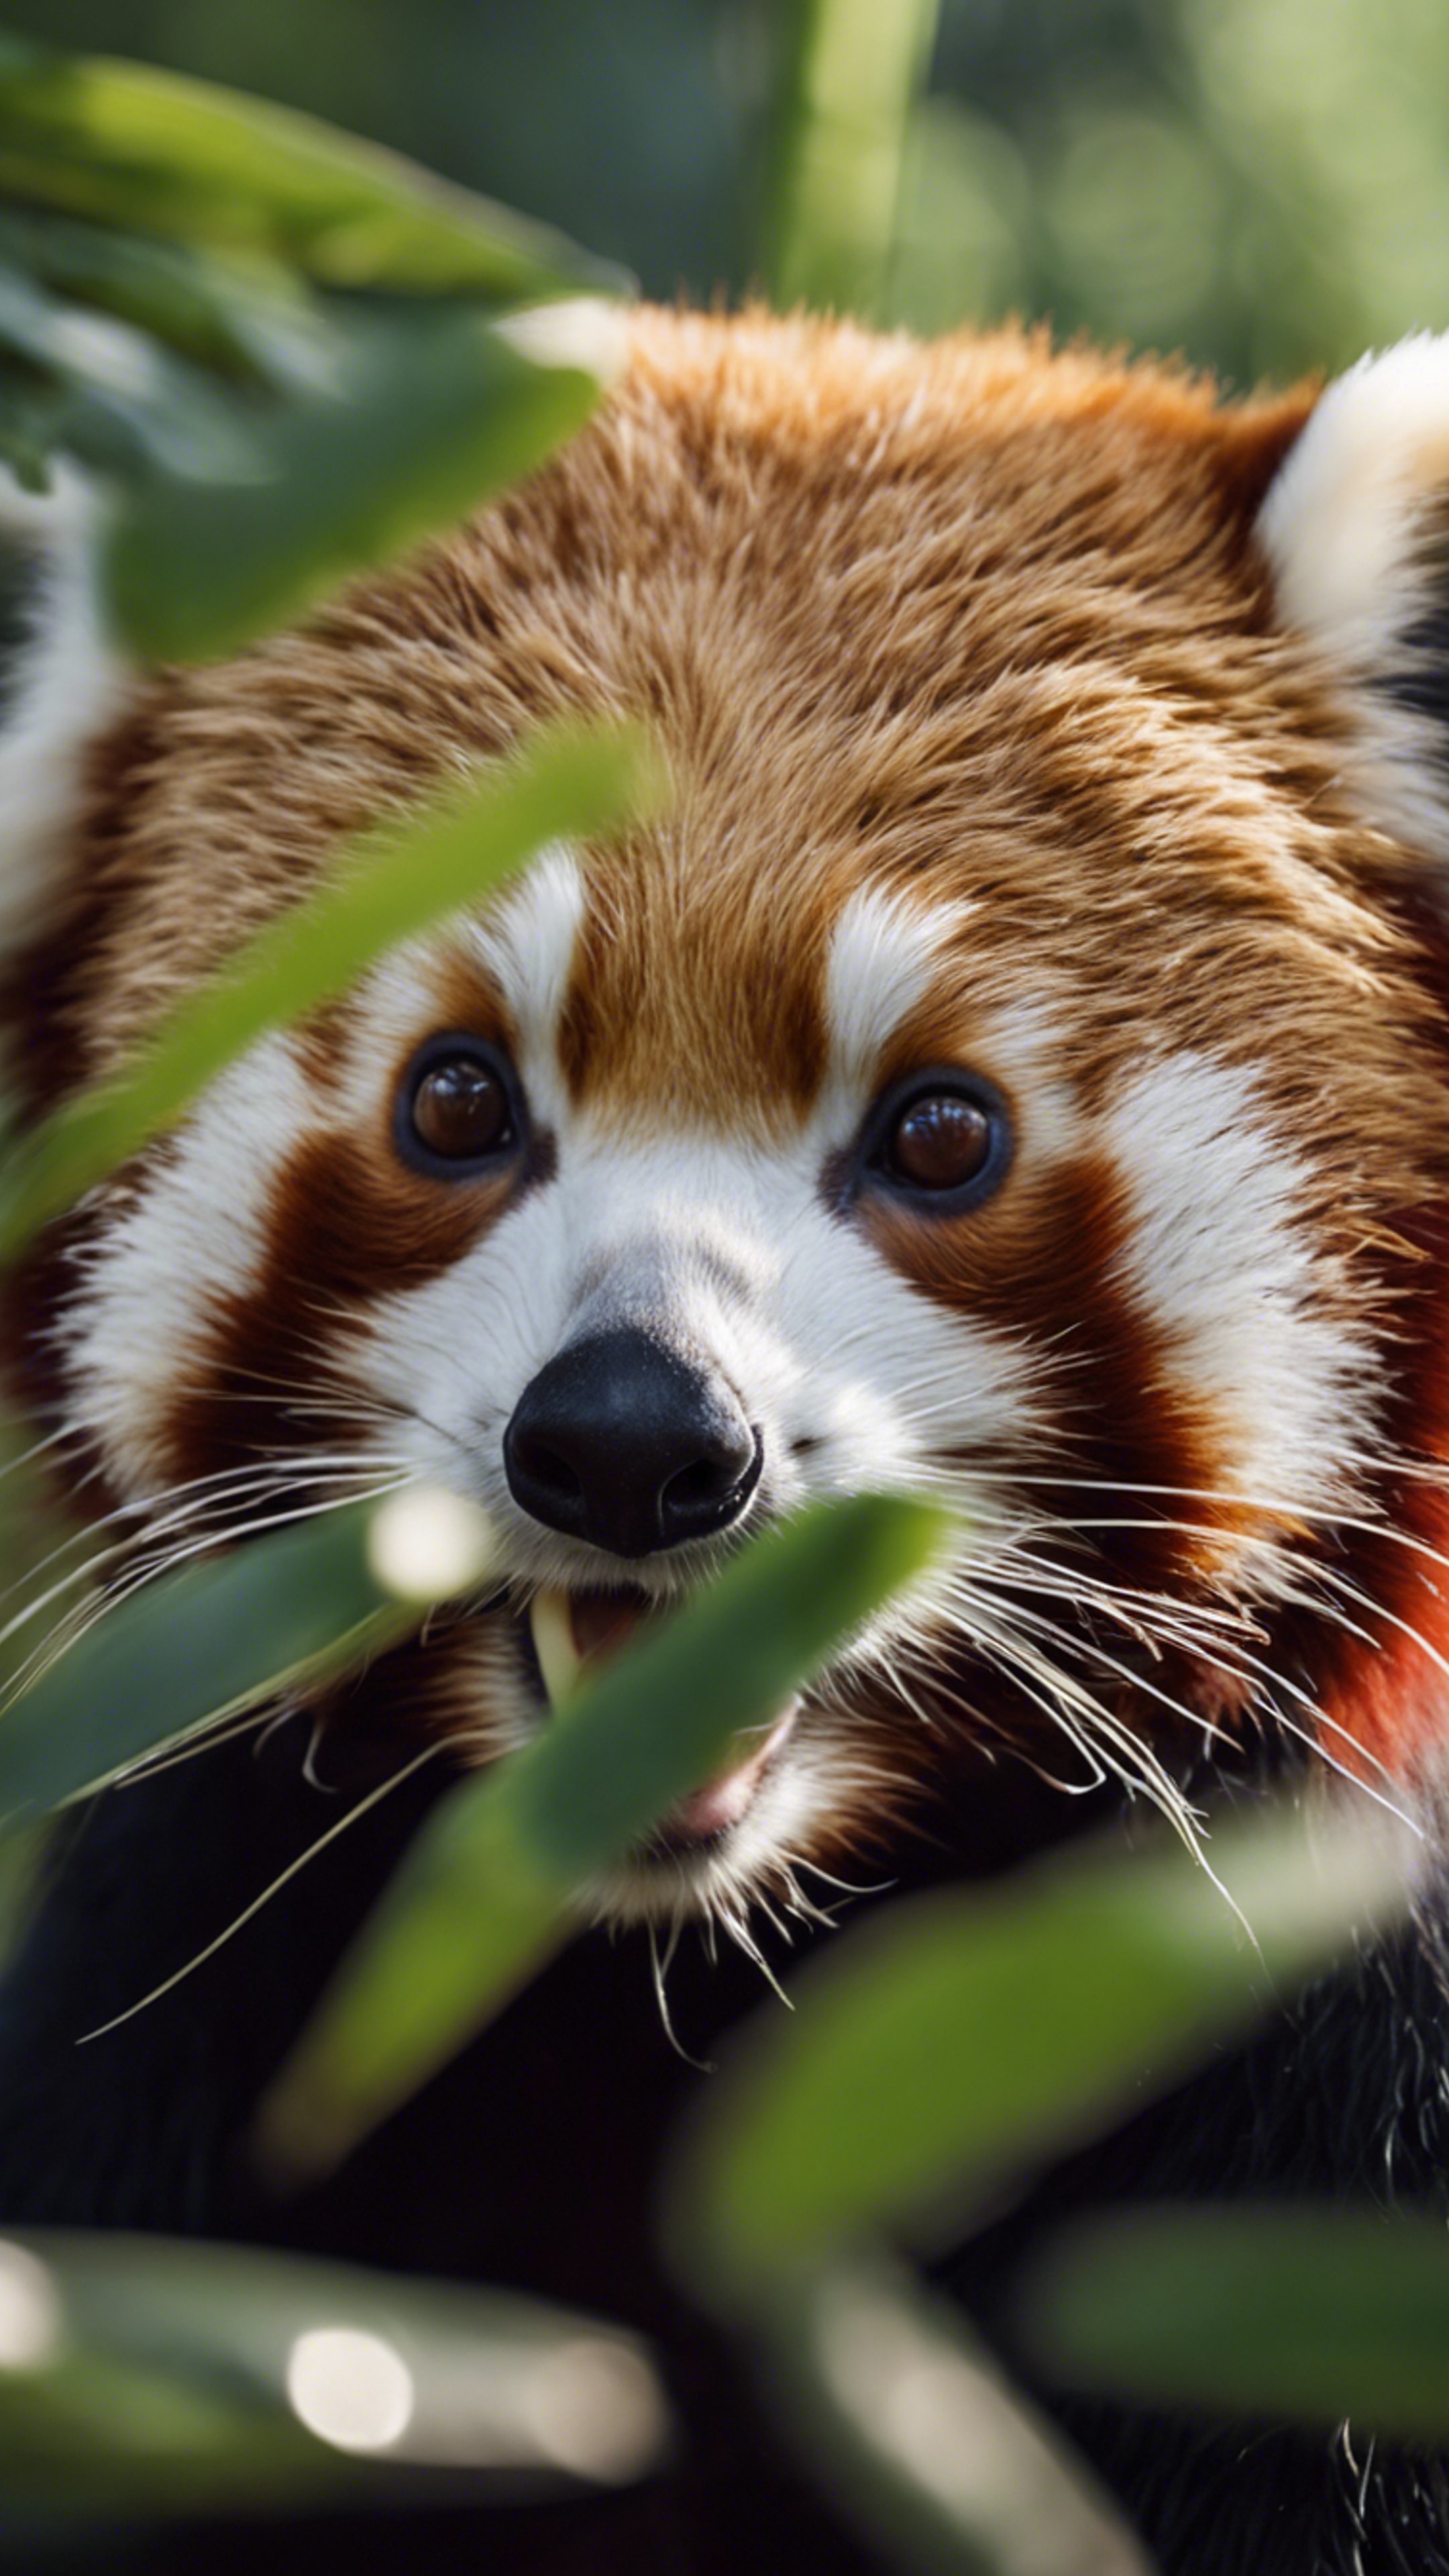 A close-up of a red panda munching on bamboo leaves Tapeta[20c4a1c4fccc4fa88325]